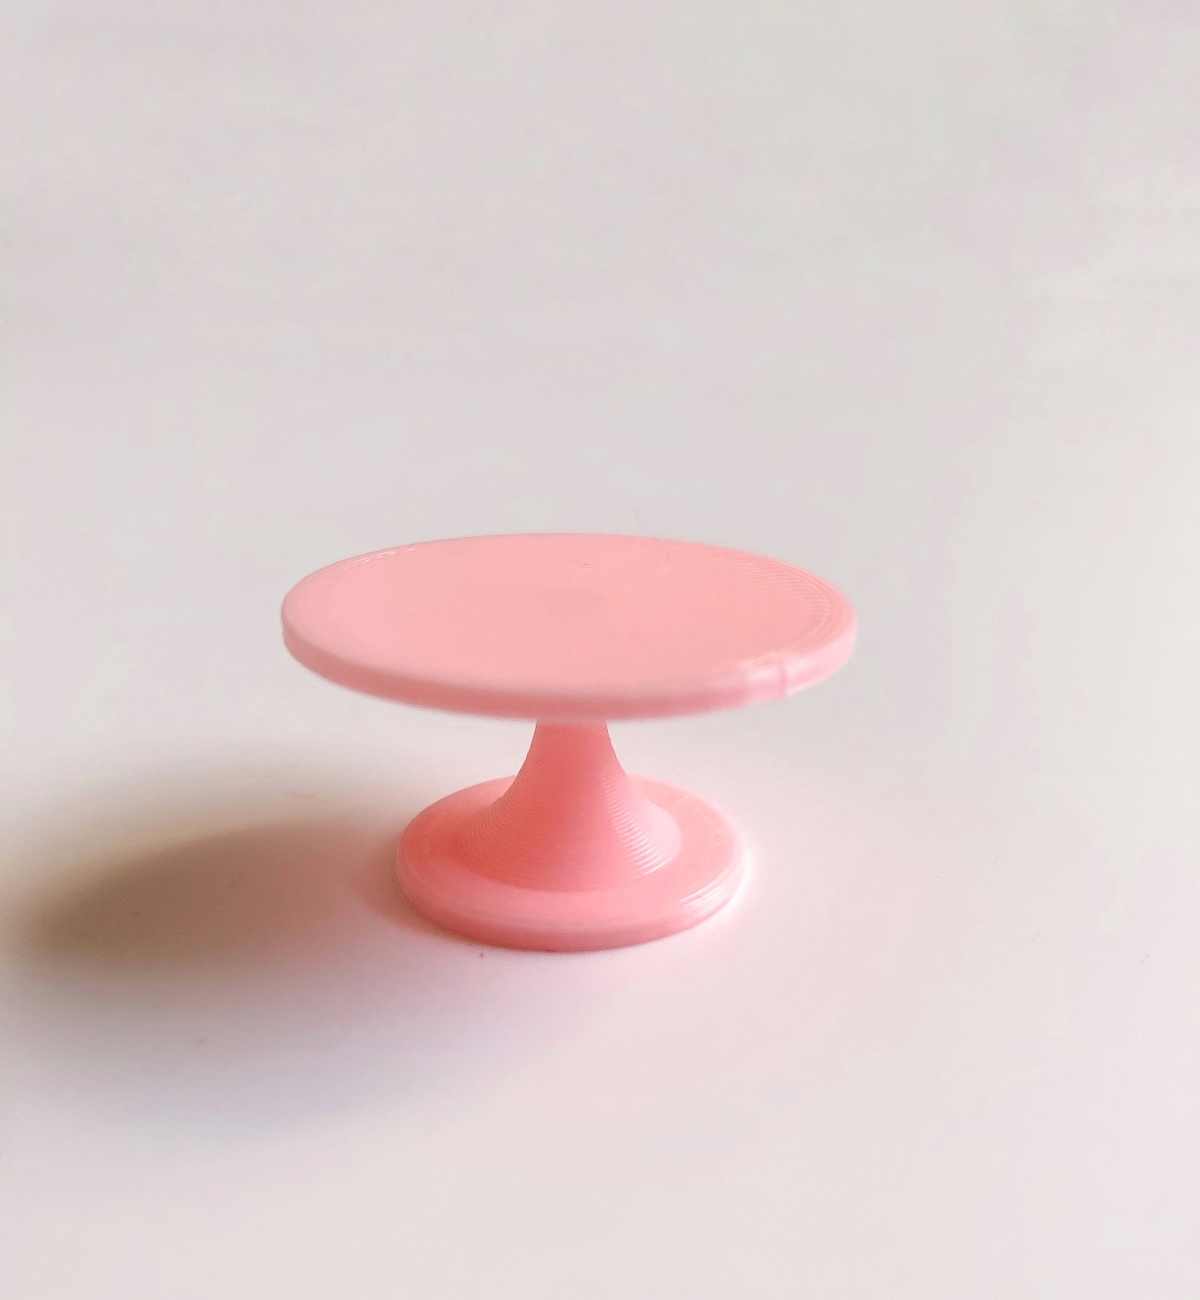 Dollhouse 3D print Pink Cake Stand